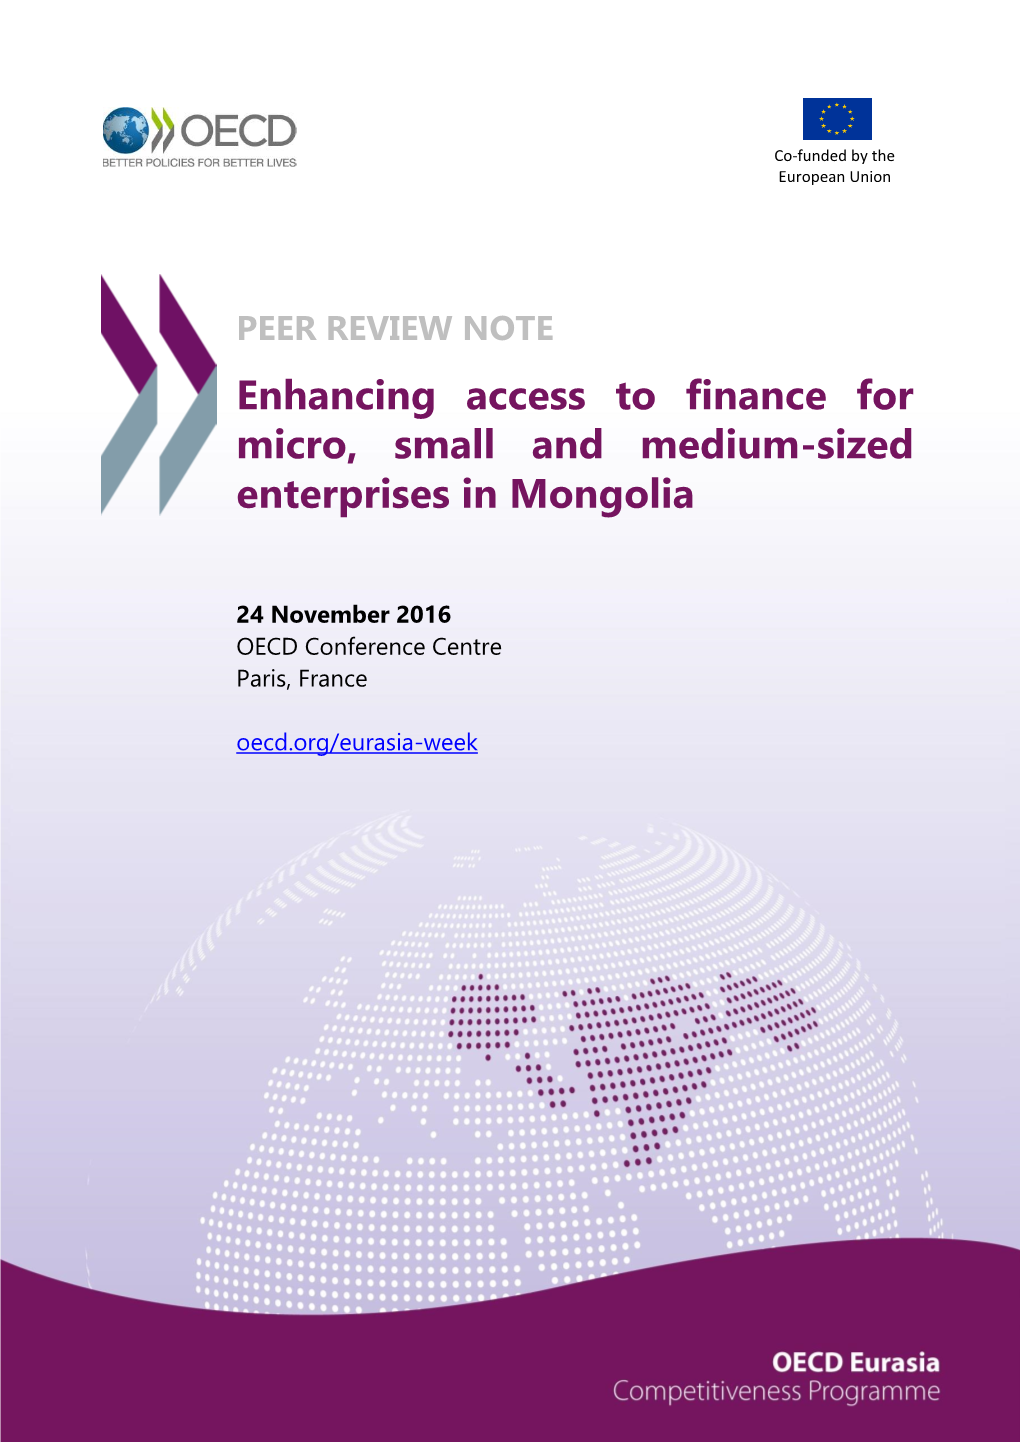 Enhancing Access to Finance for Micro, Small and Medium-Sized Enterprises in Mongolia